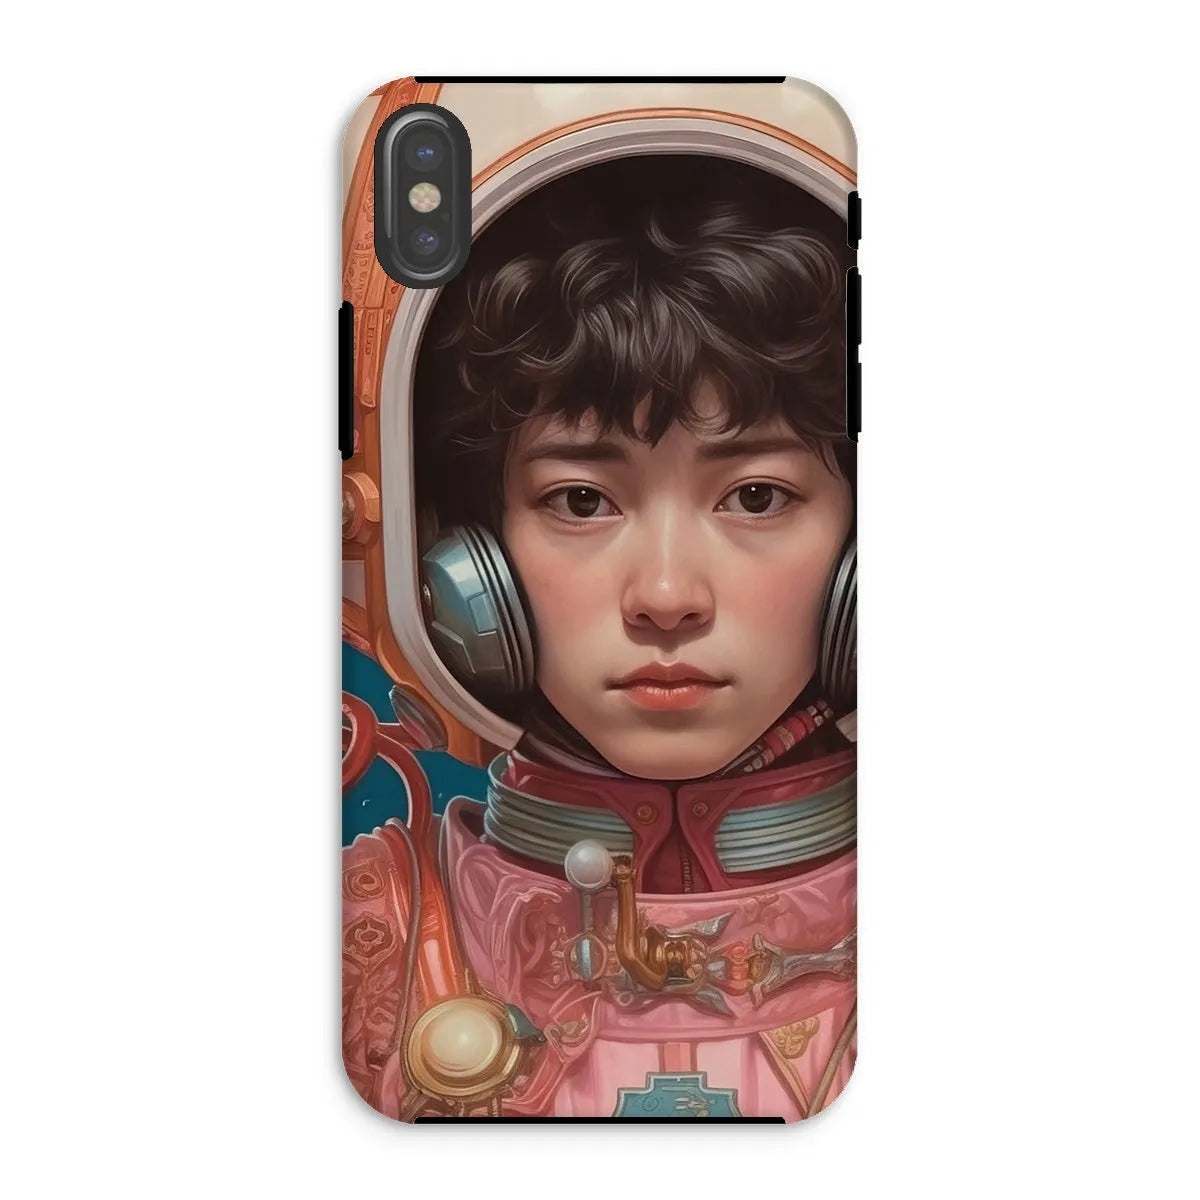 Kaito The Gay Astronaut - Lgbtq Art Phone Case - Iphone Xs / Matte - Mobile Phone Cases - Aesthetic Art